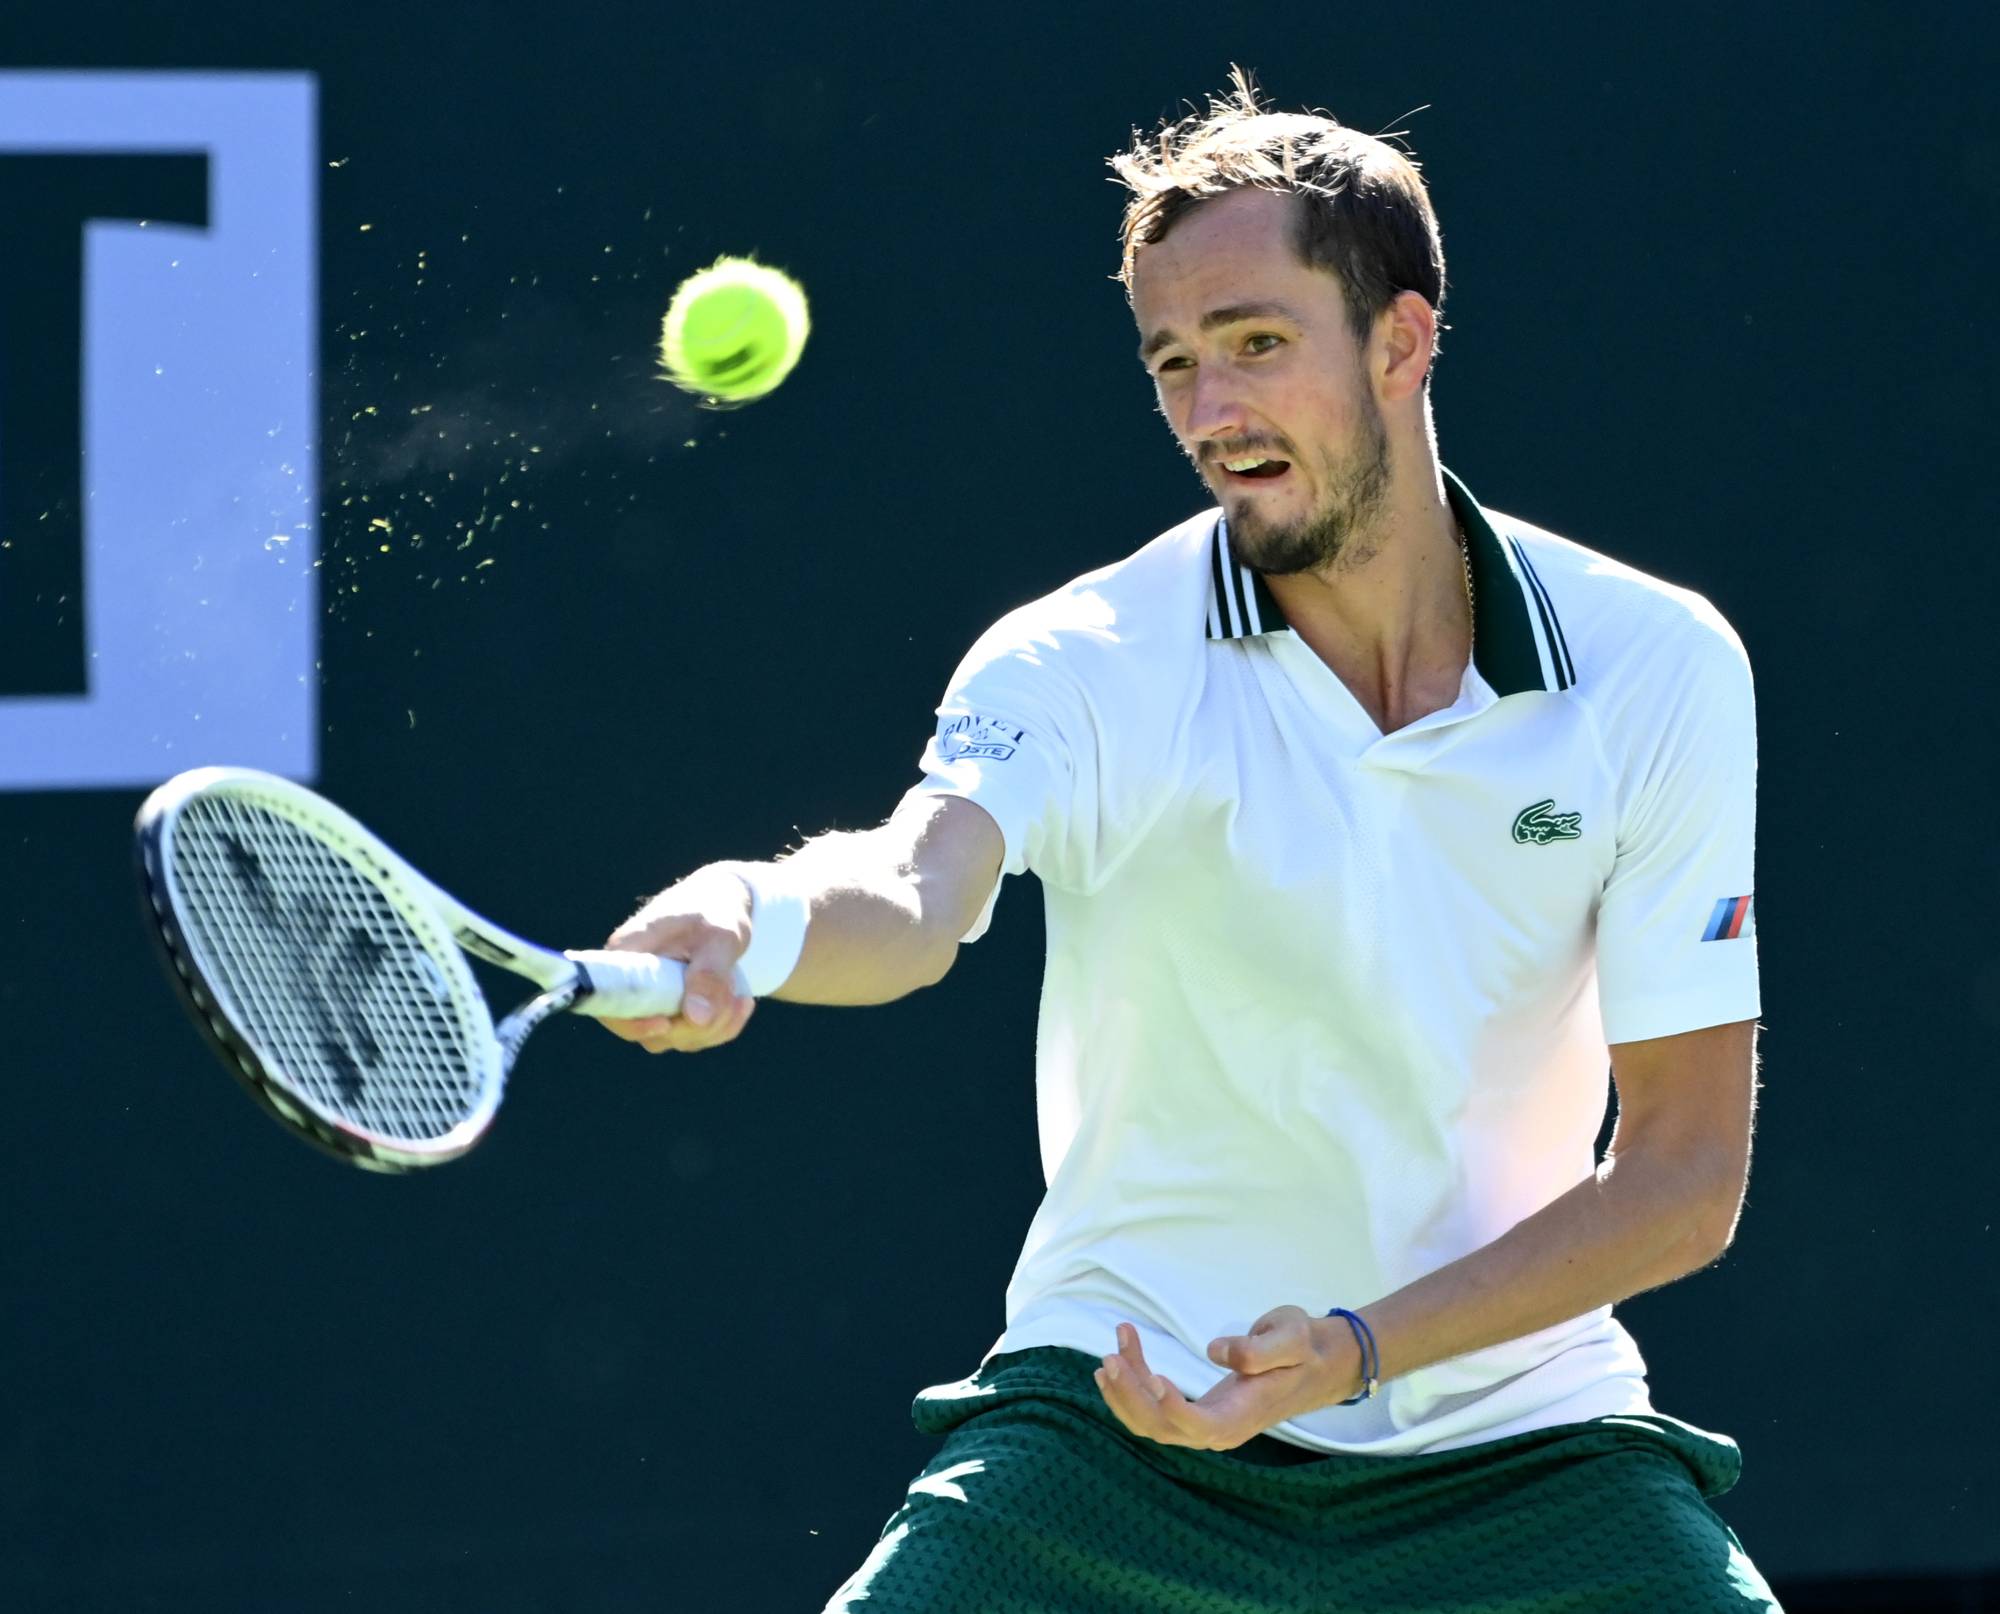 Daniil Medvedev upset in fourth round at Indian Wells | The Japan Times